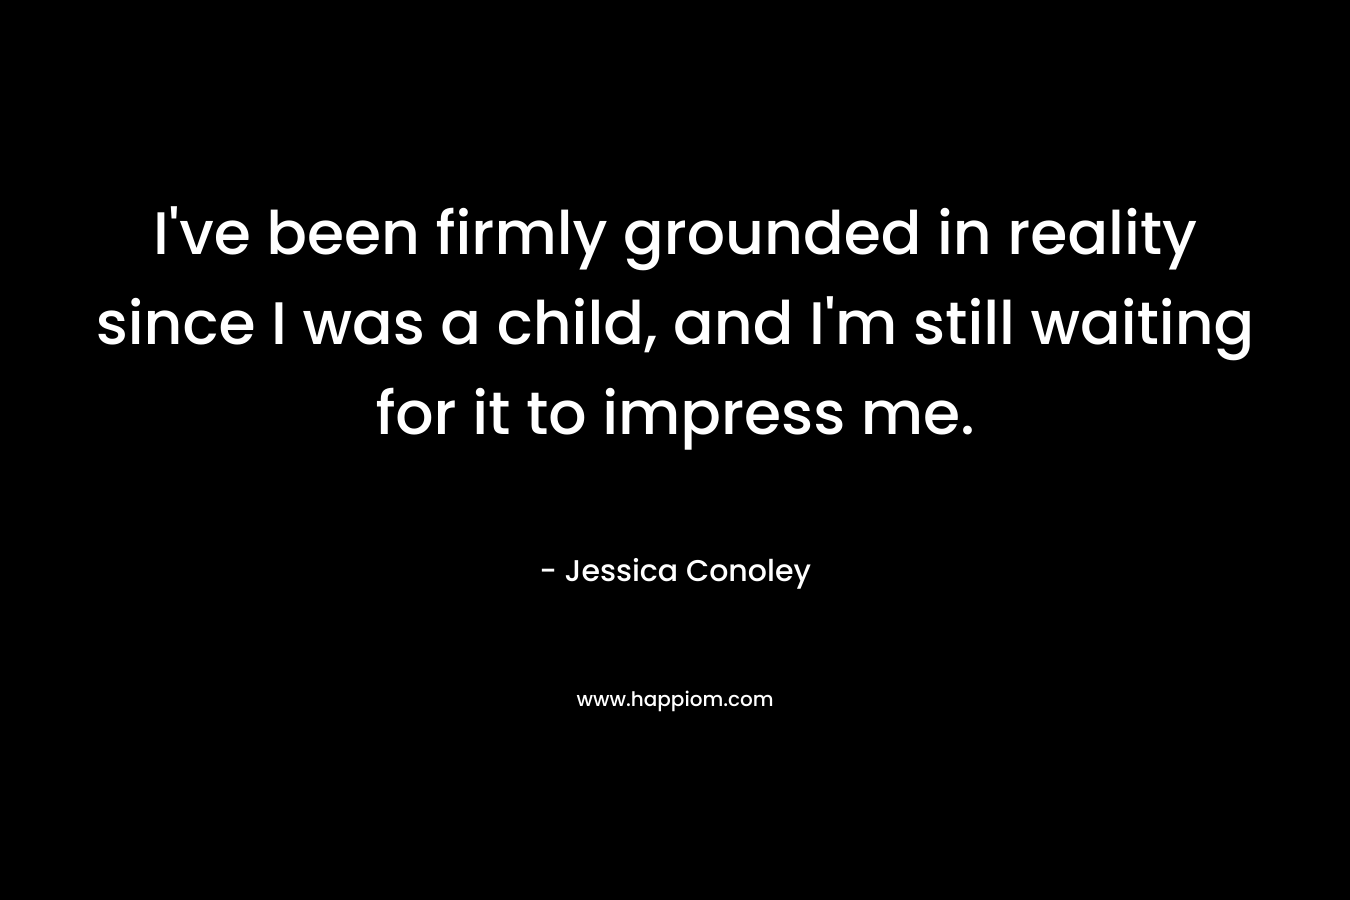 I’ve been firmly grounded in reality since I was a child, and I’m still waiting for it to impress me. – Jessica Conoley